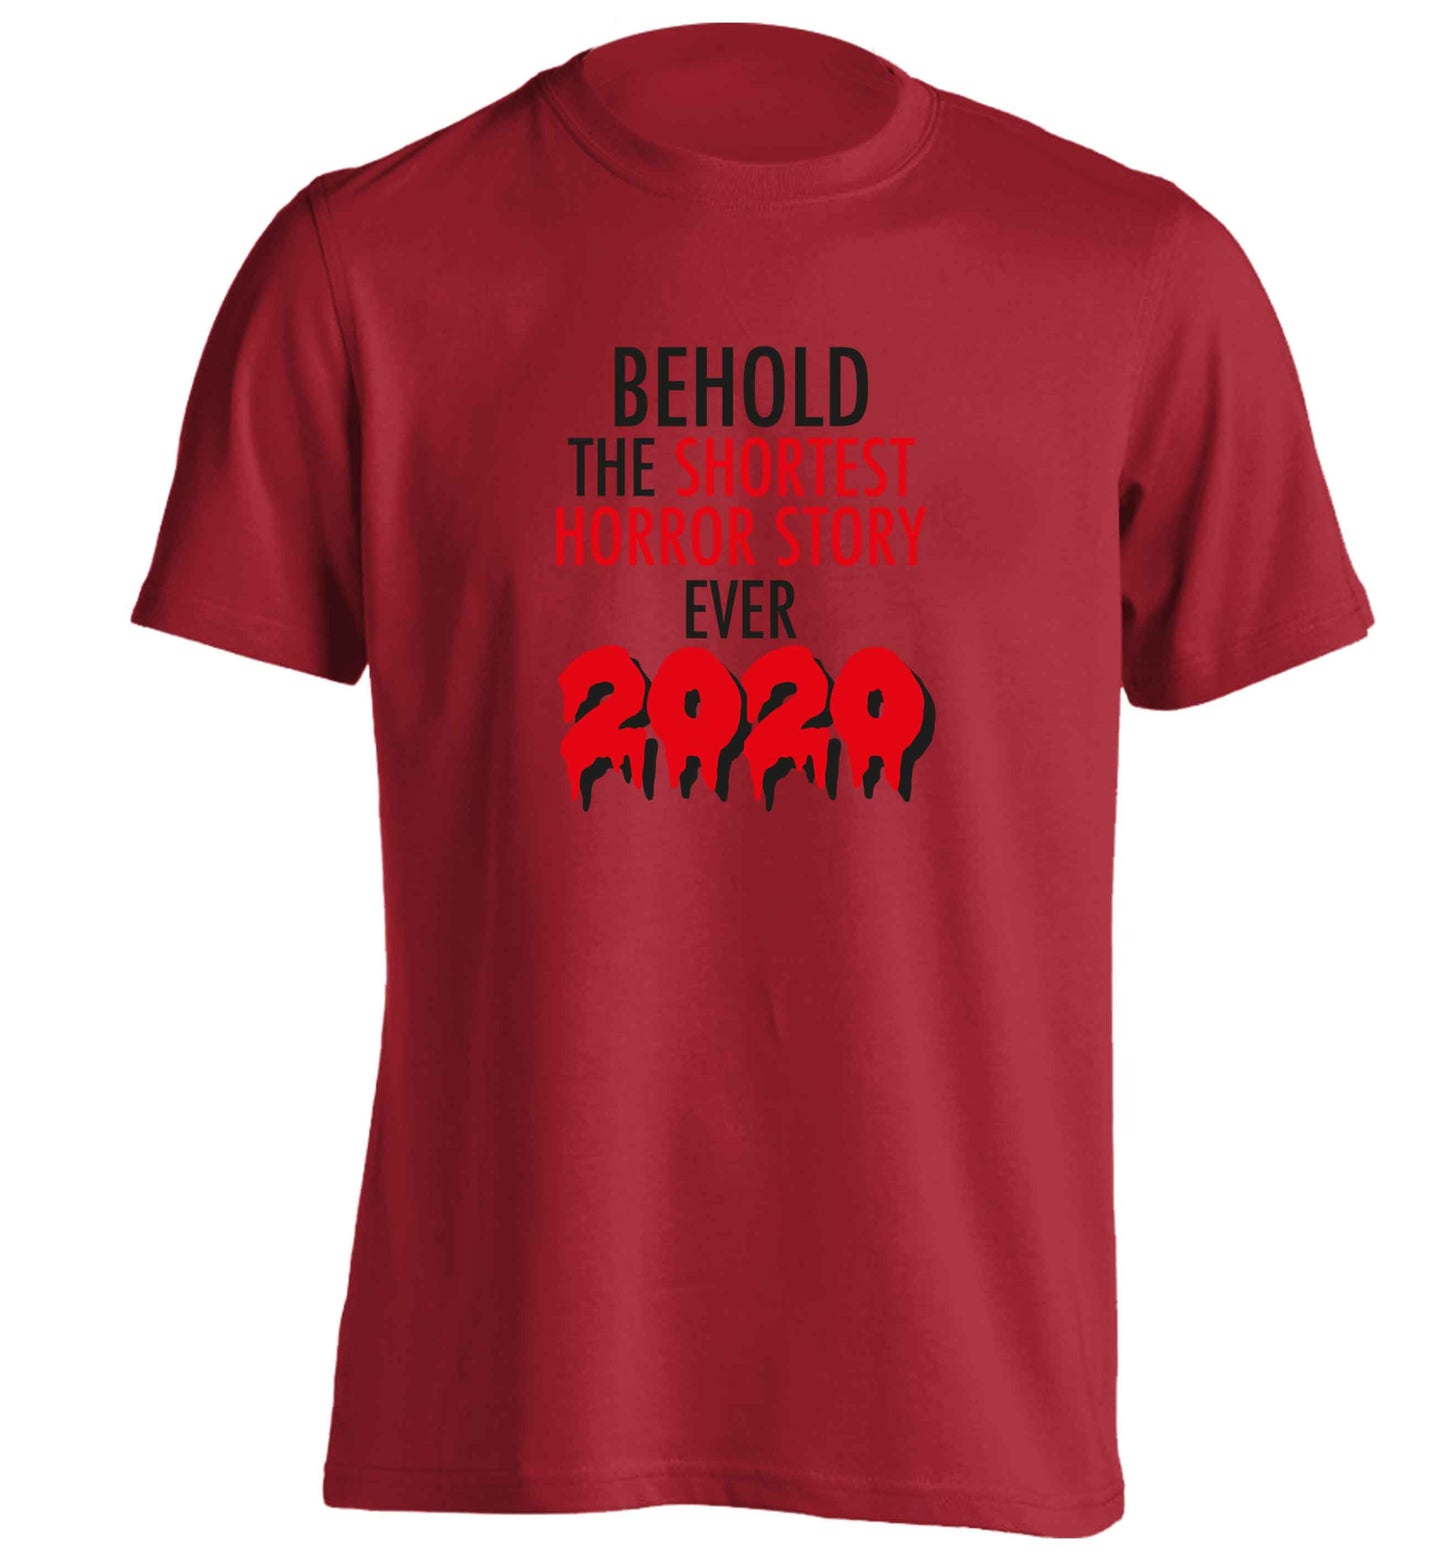 Shortest horror story ever 2020 adults unisex red Tshirt 2XL